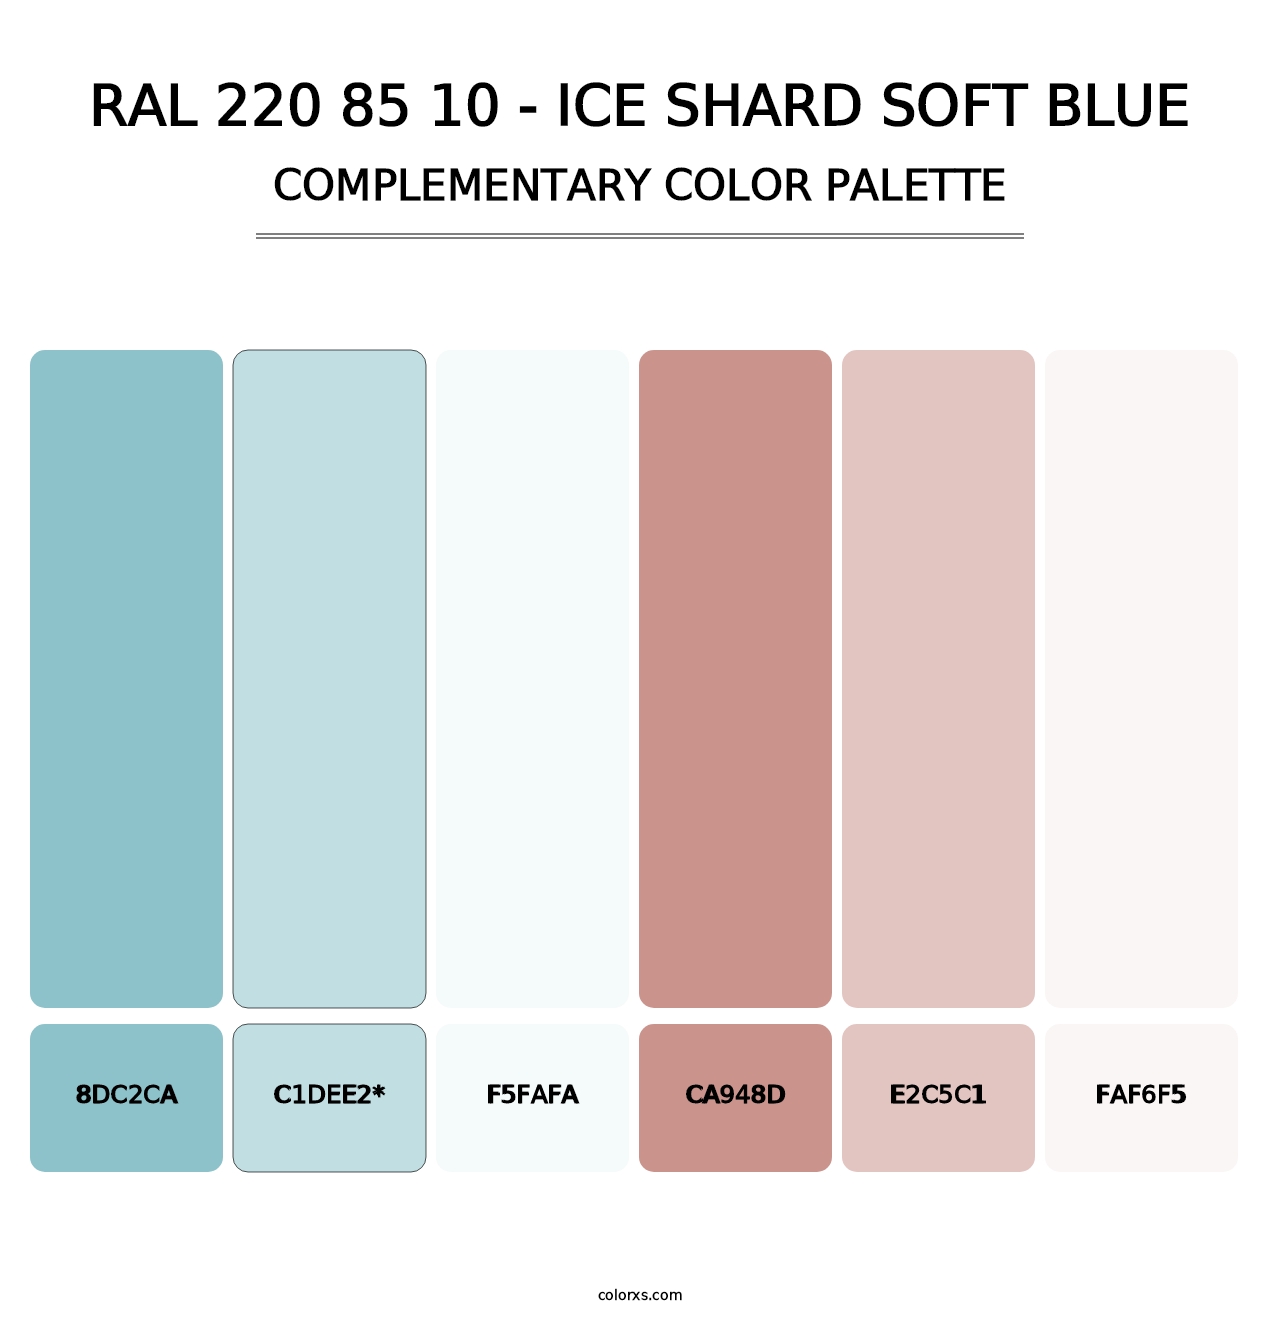 RAL 220 85 10 - Ice Shard Soft Blue - Complementary Color Palette